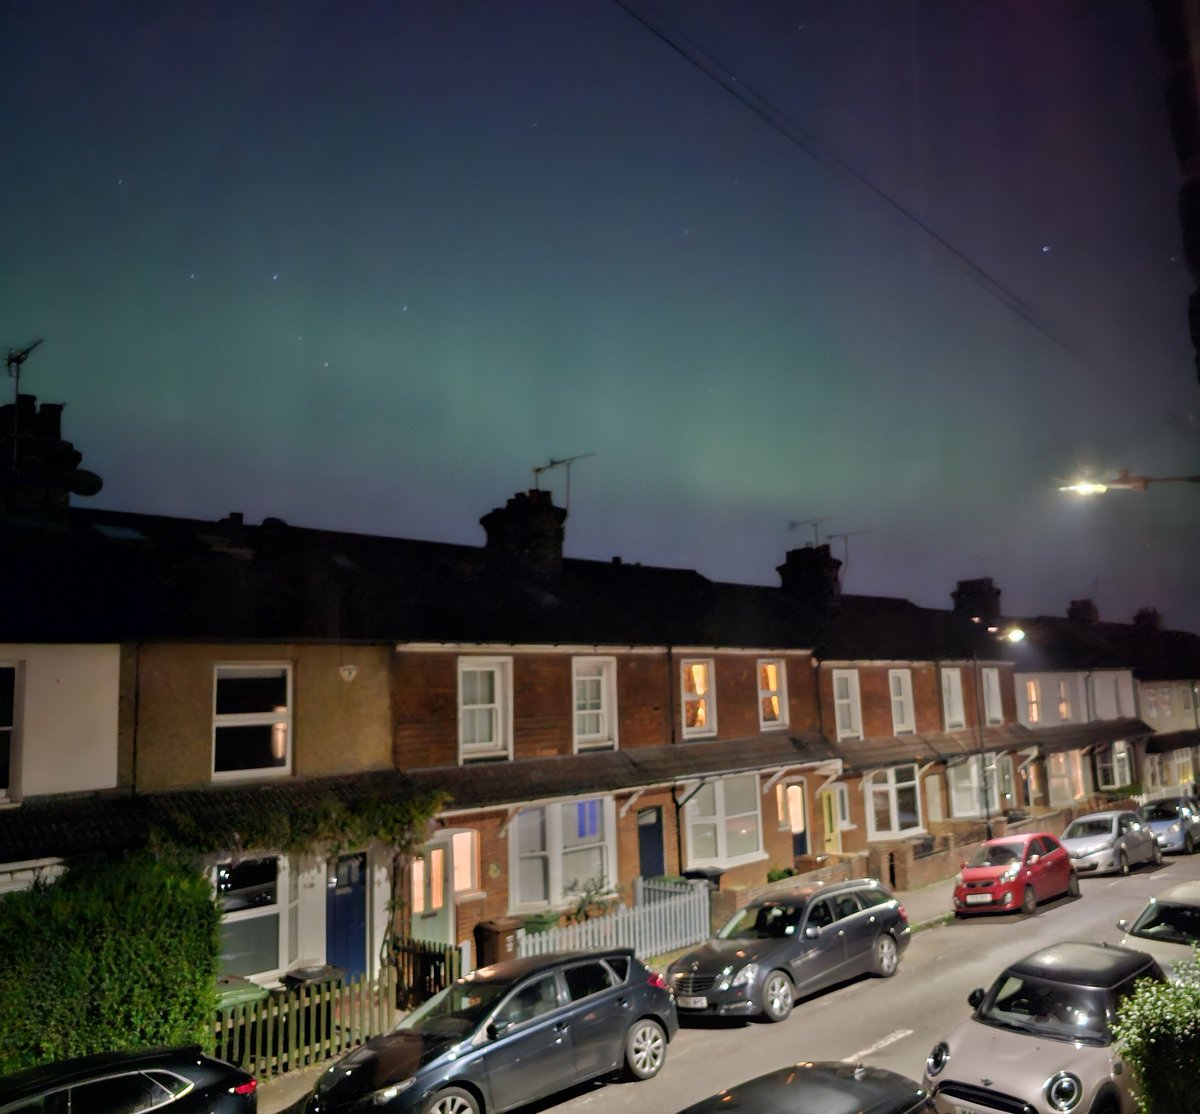 The first hint earlier this evening that the incredible was happening. Urban #StAlbans, 10.55pm, and despite the street lights, the glare, the ladies started to dance. I feel so amazingly privileged to have seen this tonight. Truly incredible. ❤️ #Aurora #NorthernLights